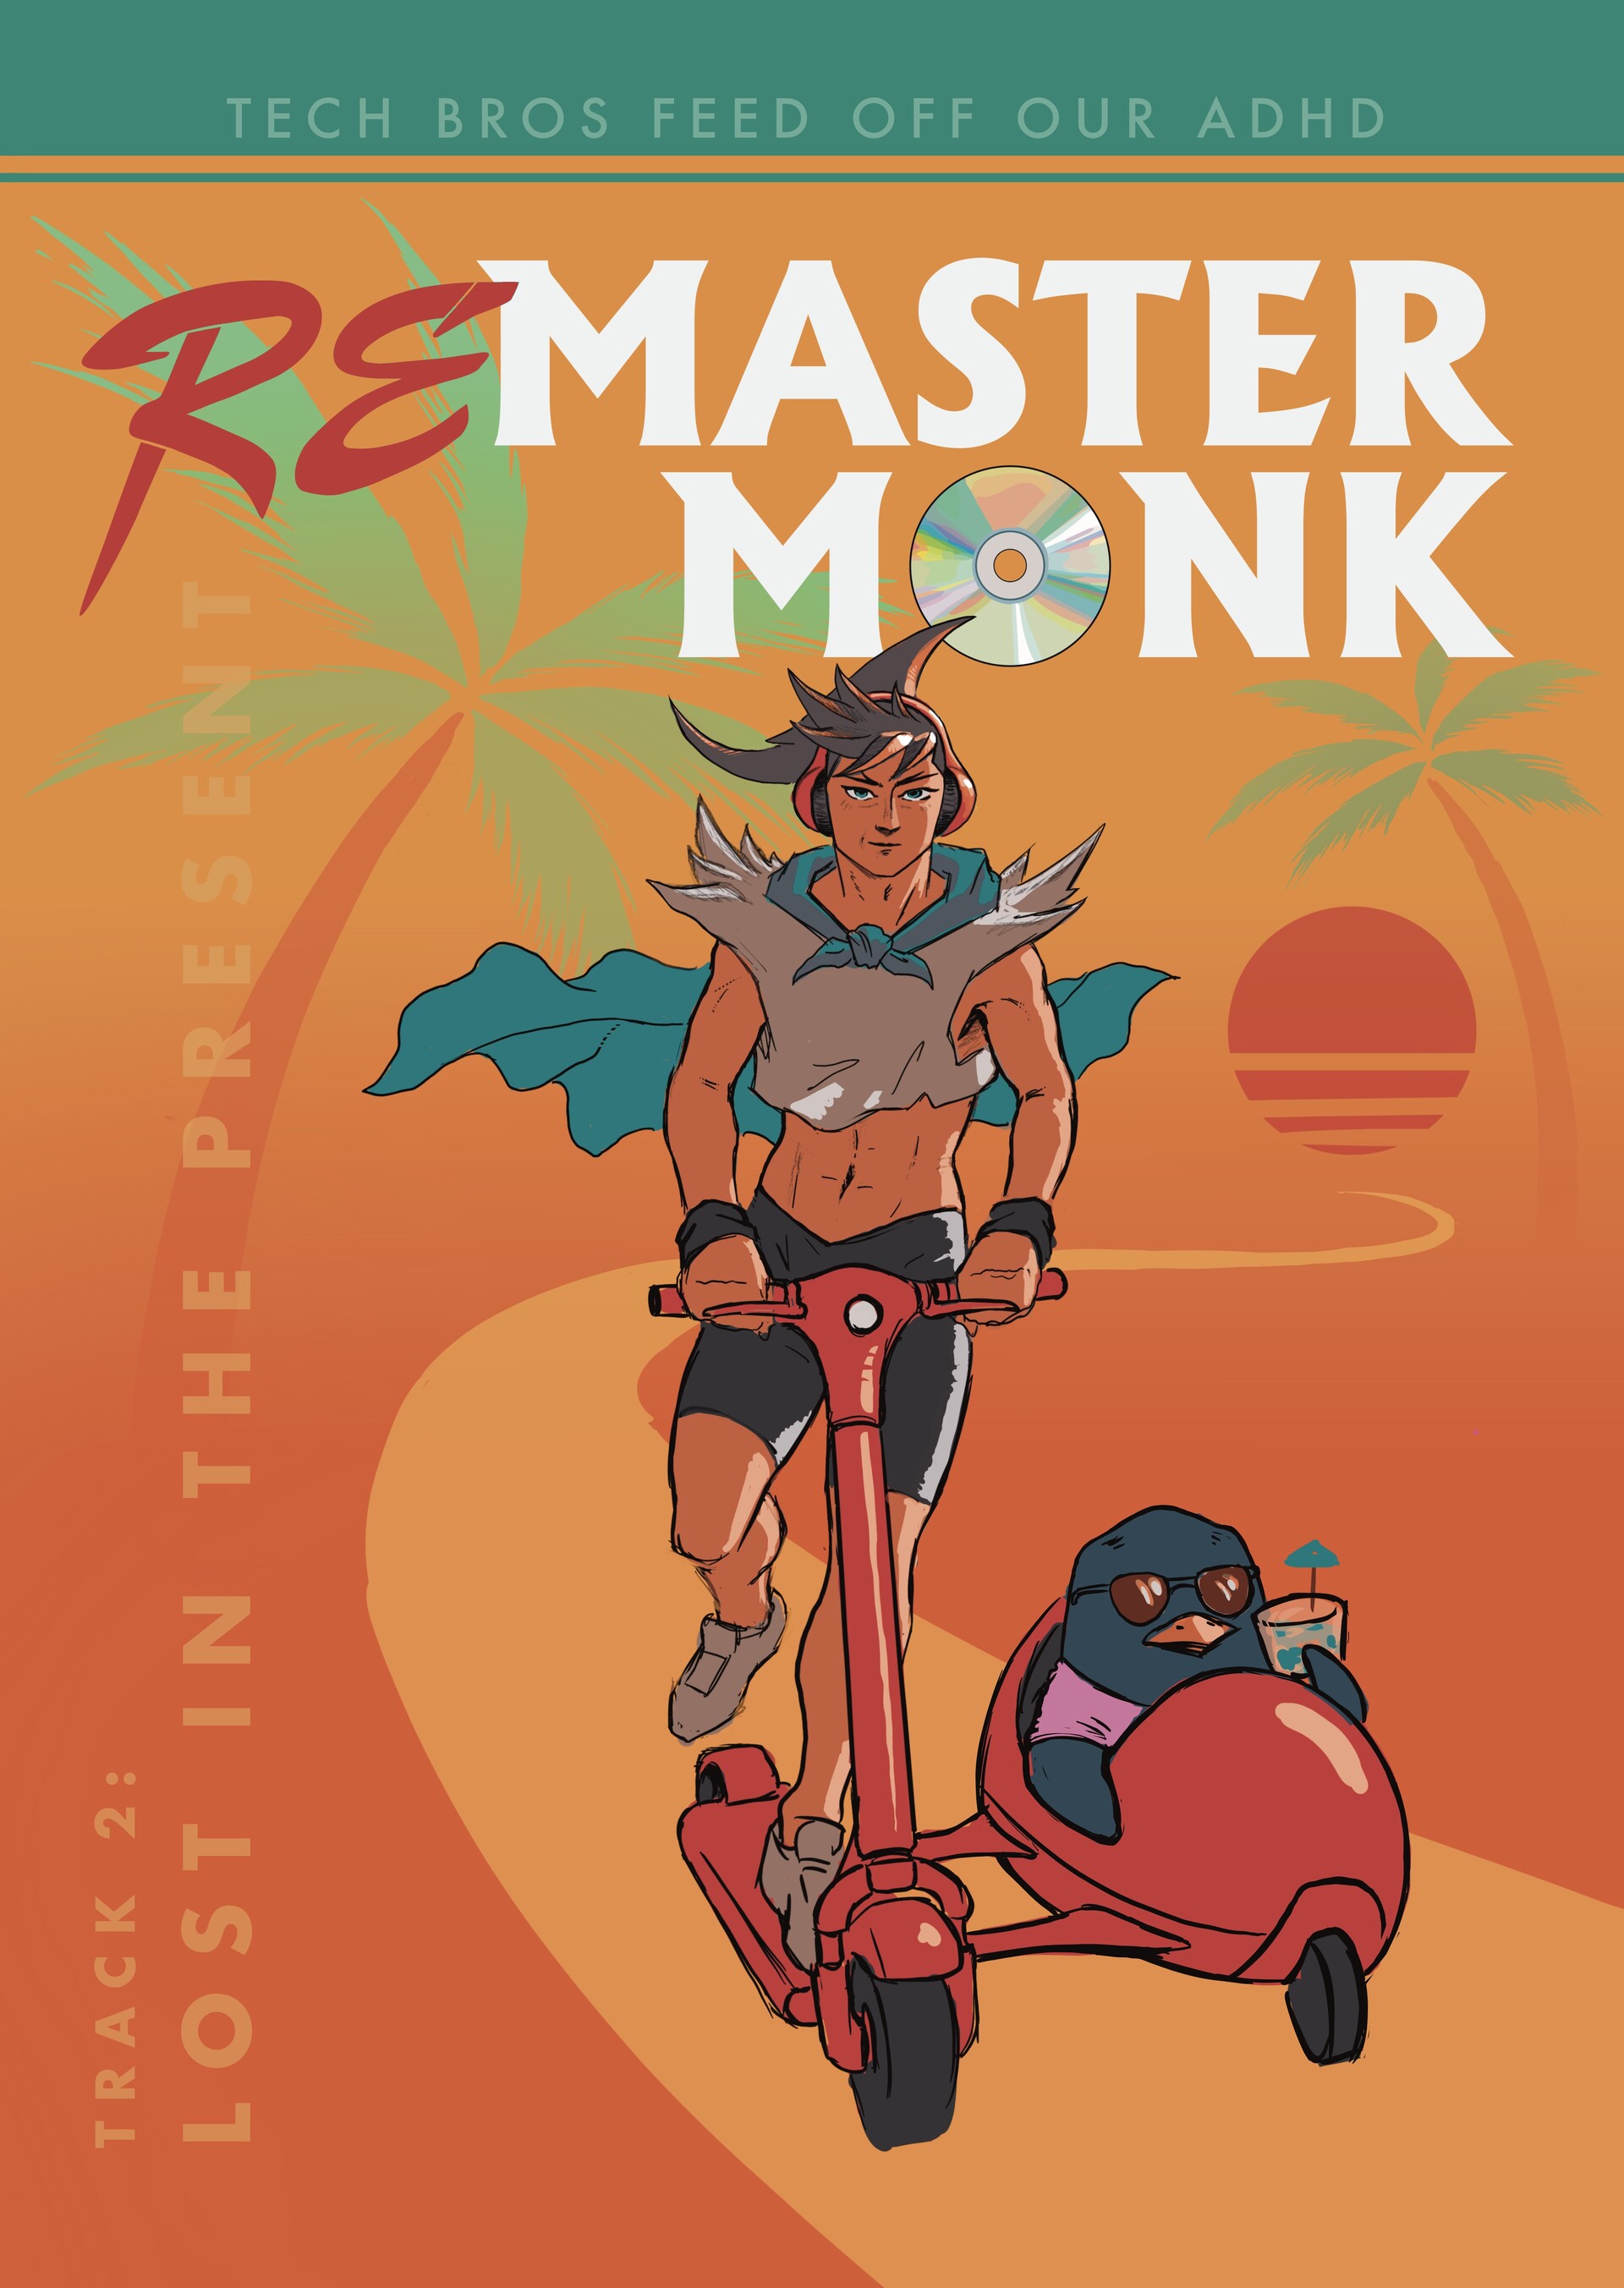 ReMaster Monk #2 Cover Mockup